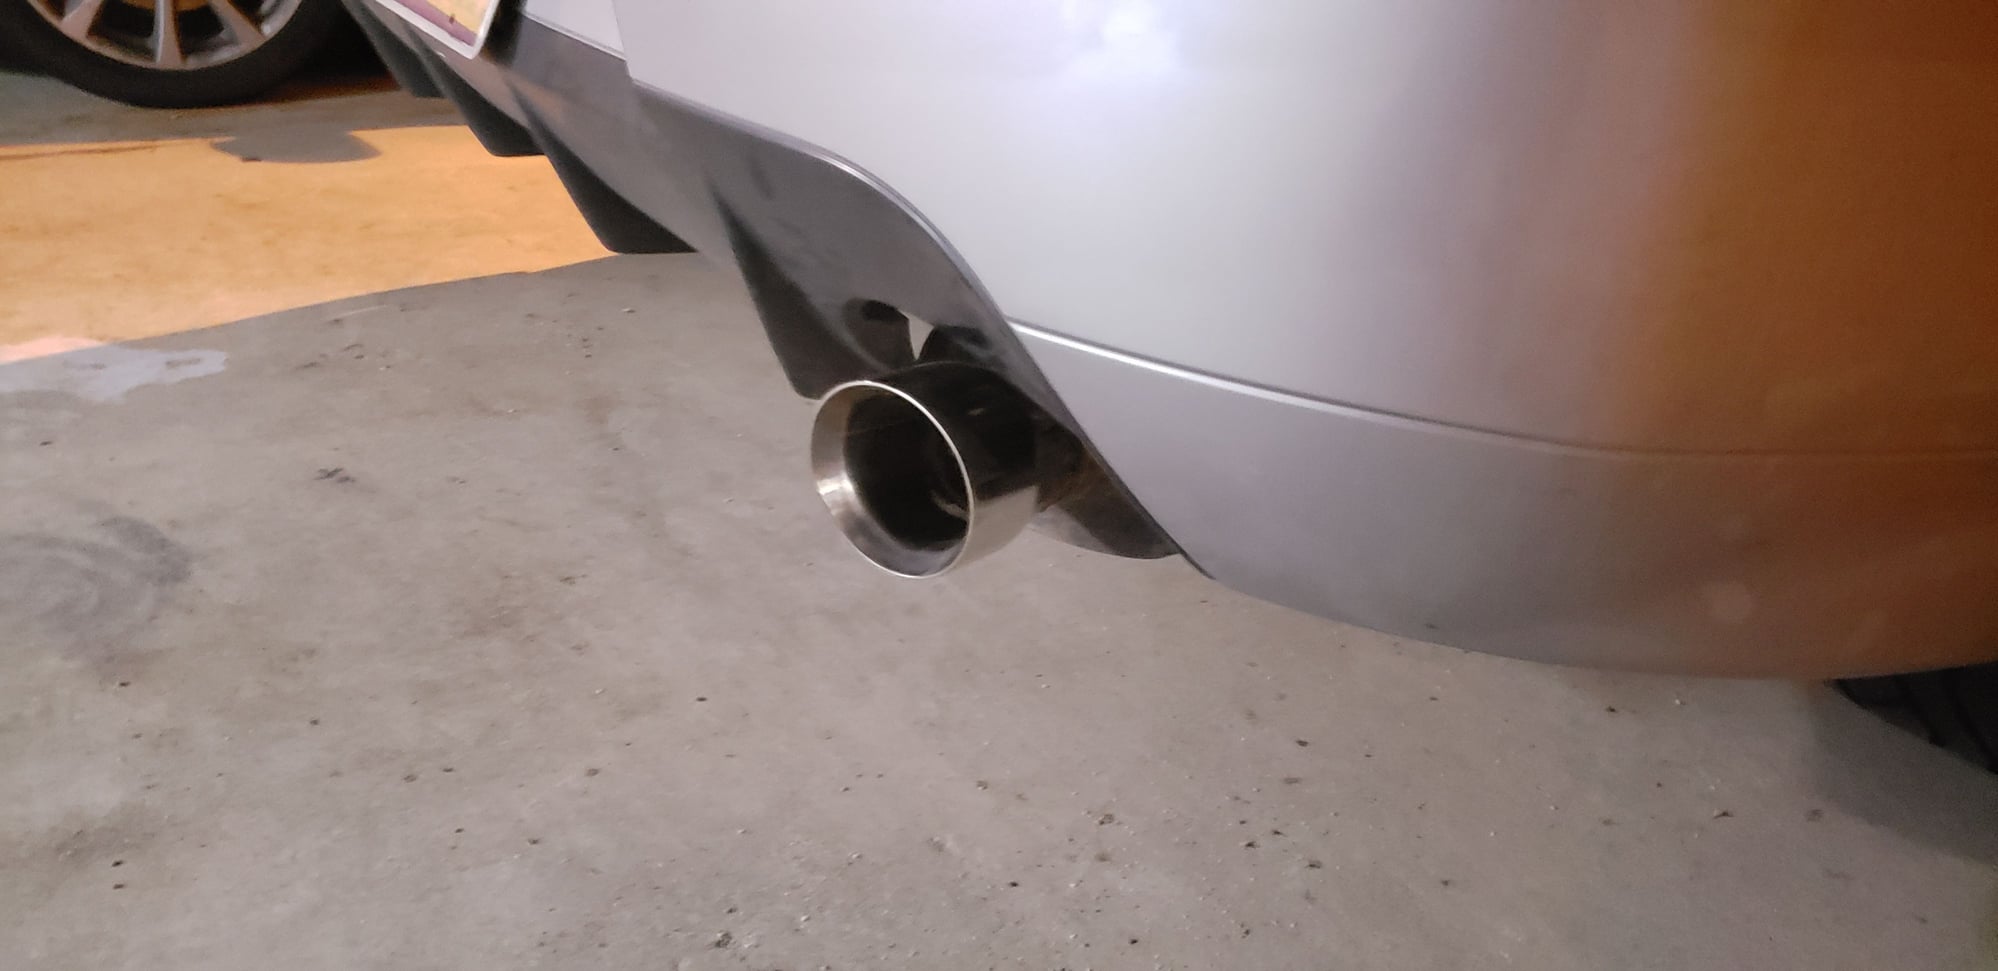 Engine - Exhaust - SoCal guys - Who wants a RRE Stealth Exhaust? Want to trade mine - Used - 2003 to 2006 Mitsubishi Lancer Evolution - San Bernardino, CA 92407, United States